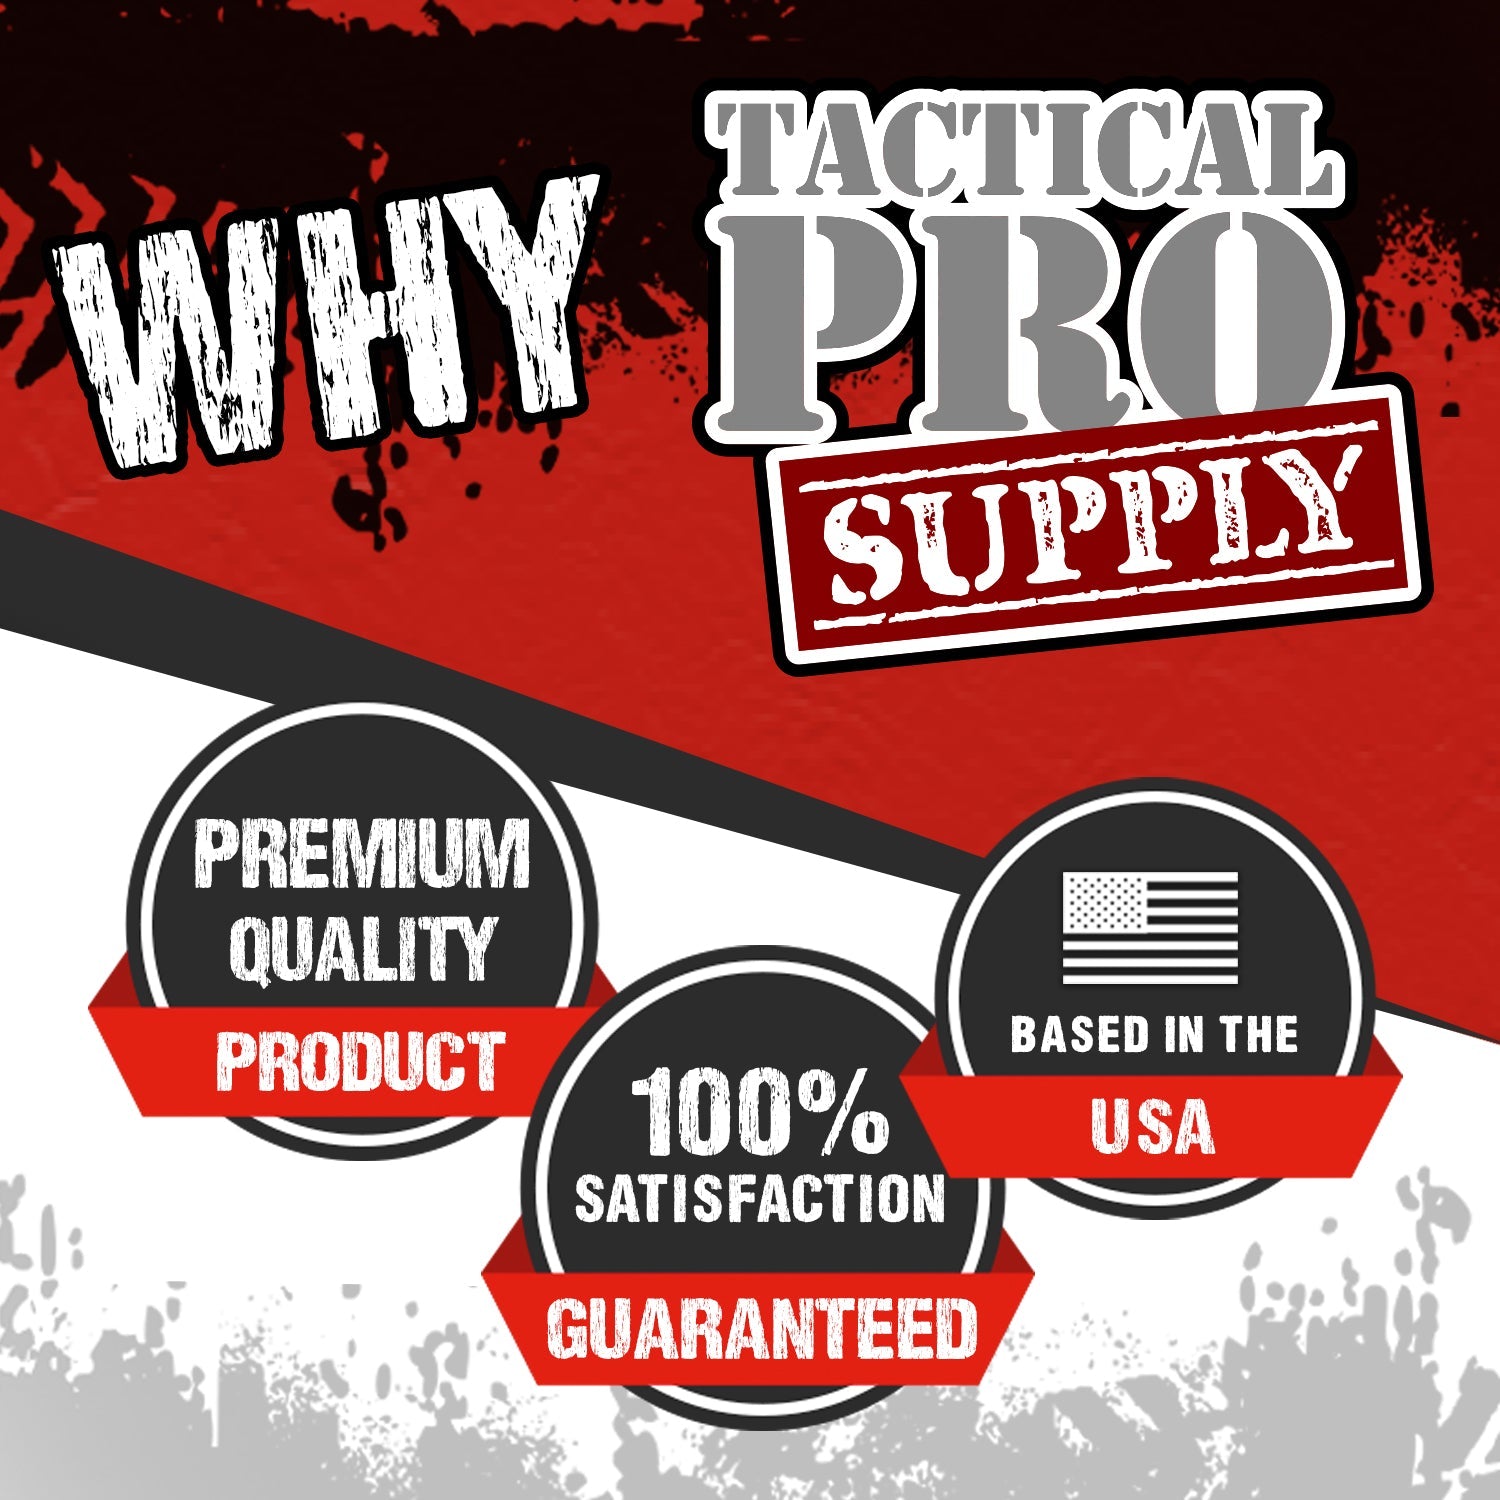 Just The Tip - Tactical Pro Supply, LLC